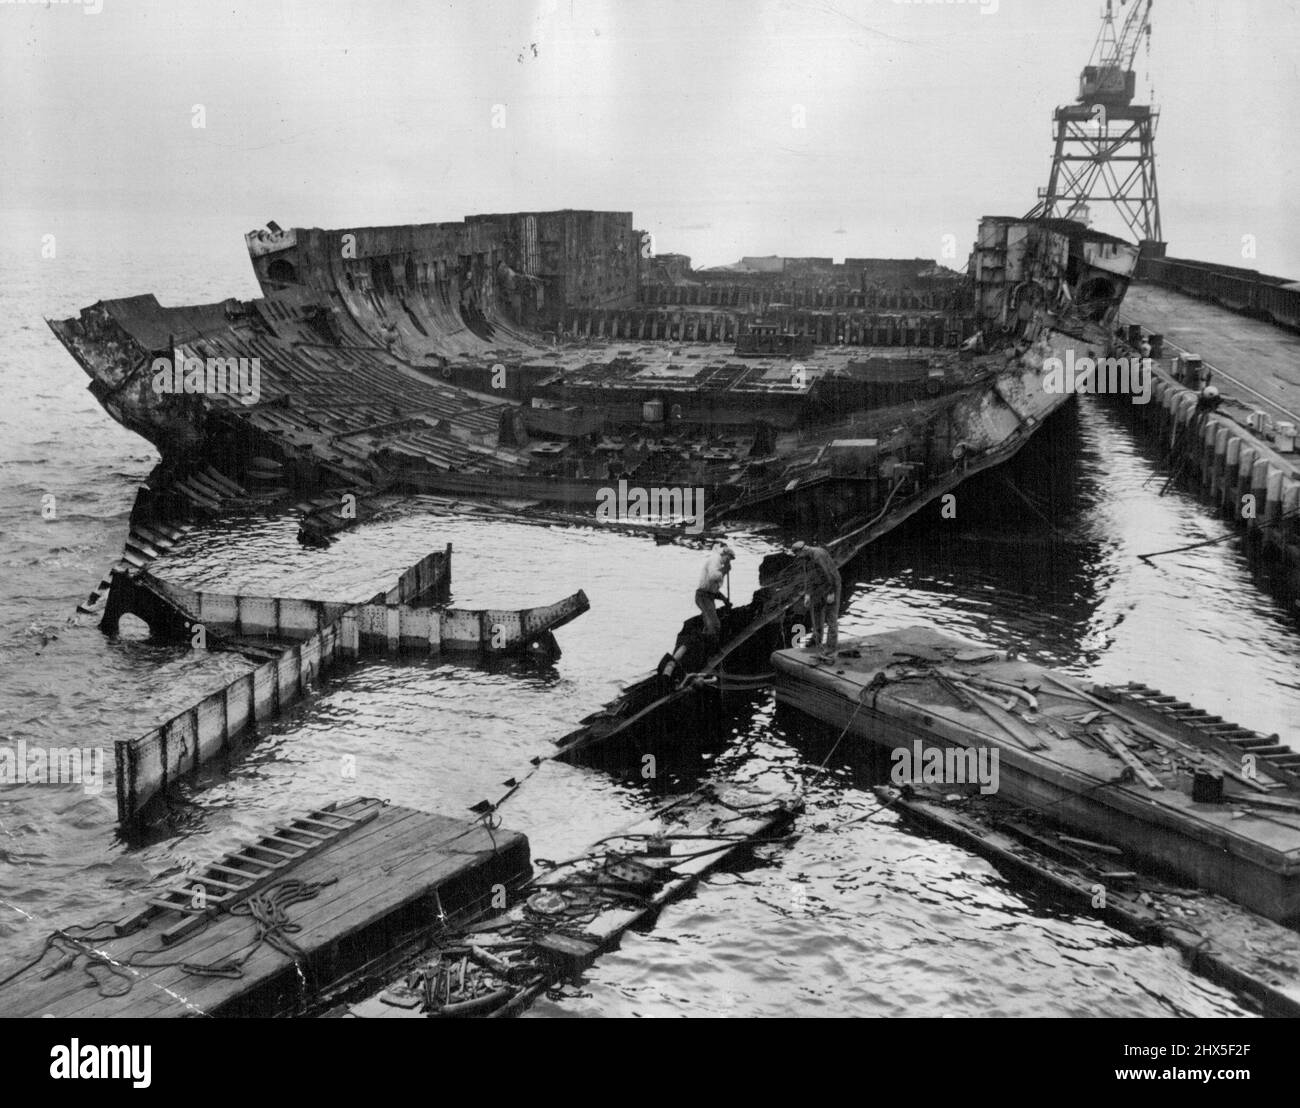 All that is Left of the former great French liner Normandie. Wreeking crews at Port Newark, New Jersey (USA), are rounding off their task of turning her into scrap metal. During the war the Normandie caught fire in port and later capsized. September 3, 1947. During World War II, Normandie was seized by U.S. authorities at New York and renamed USS Lafayette. In 1942, the liner caught fire while being converted to a troopship, capsized onto her port side and came to rest on the mud of the Hudson River at Pier 88 Stock Photo